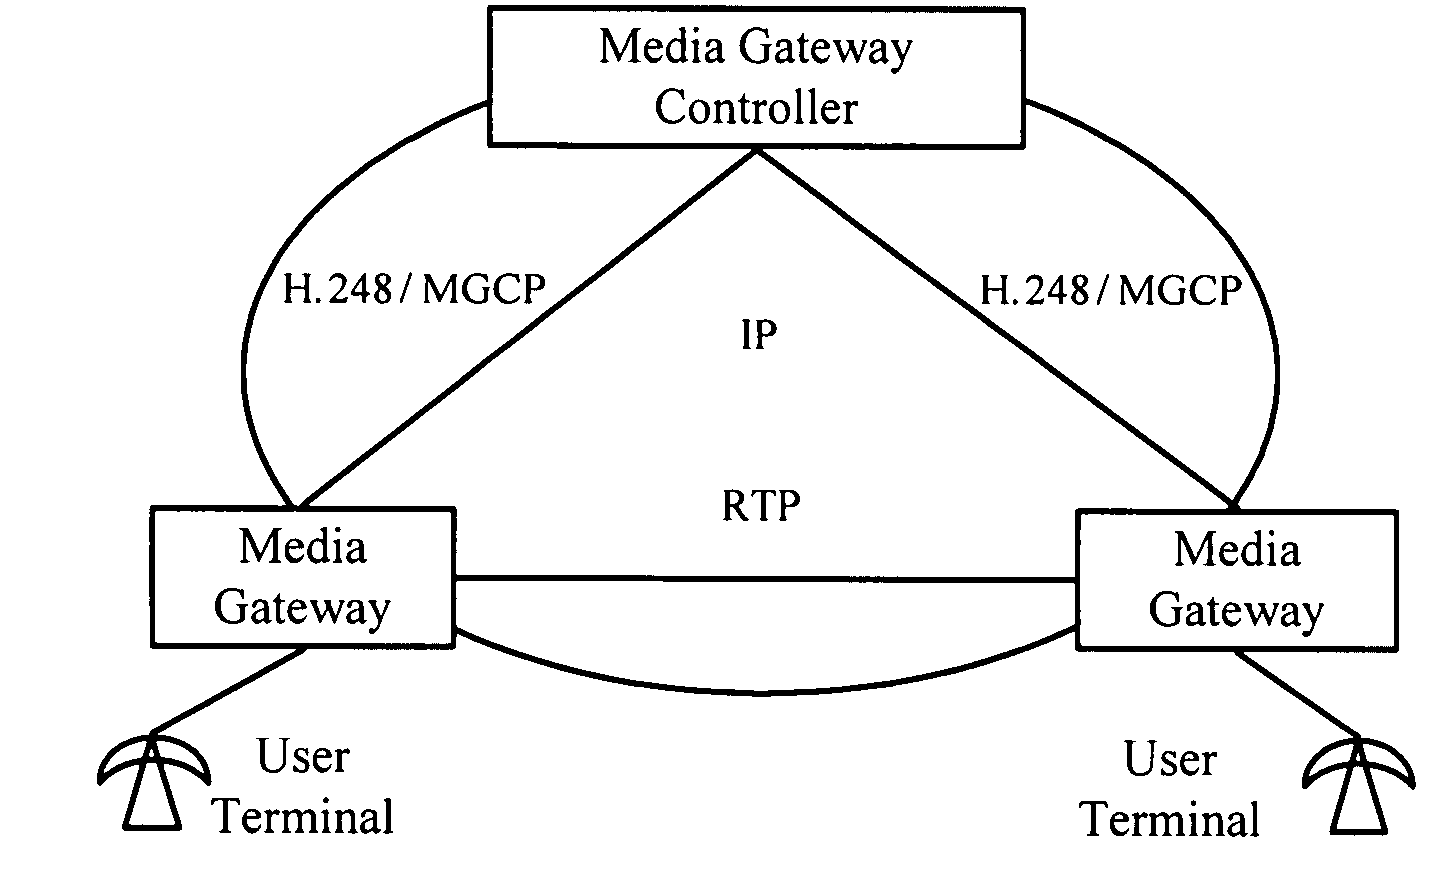 Media gateway for reporting events and method for reporting events by media gateway in a next generation network